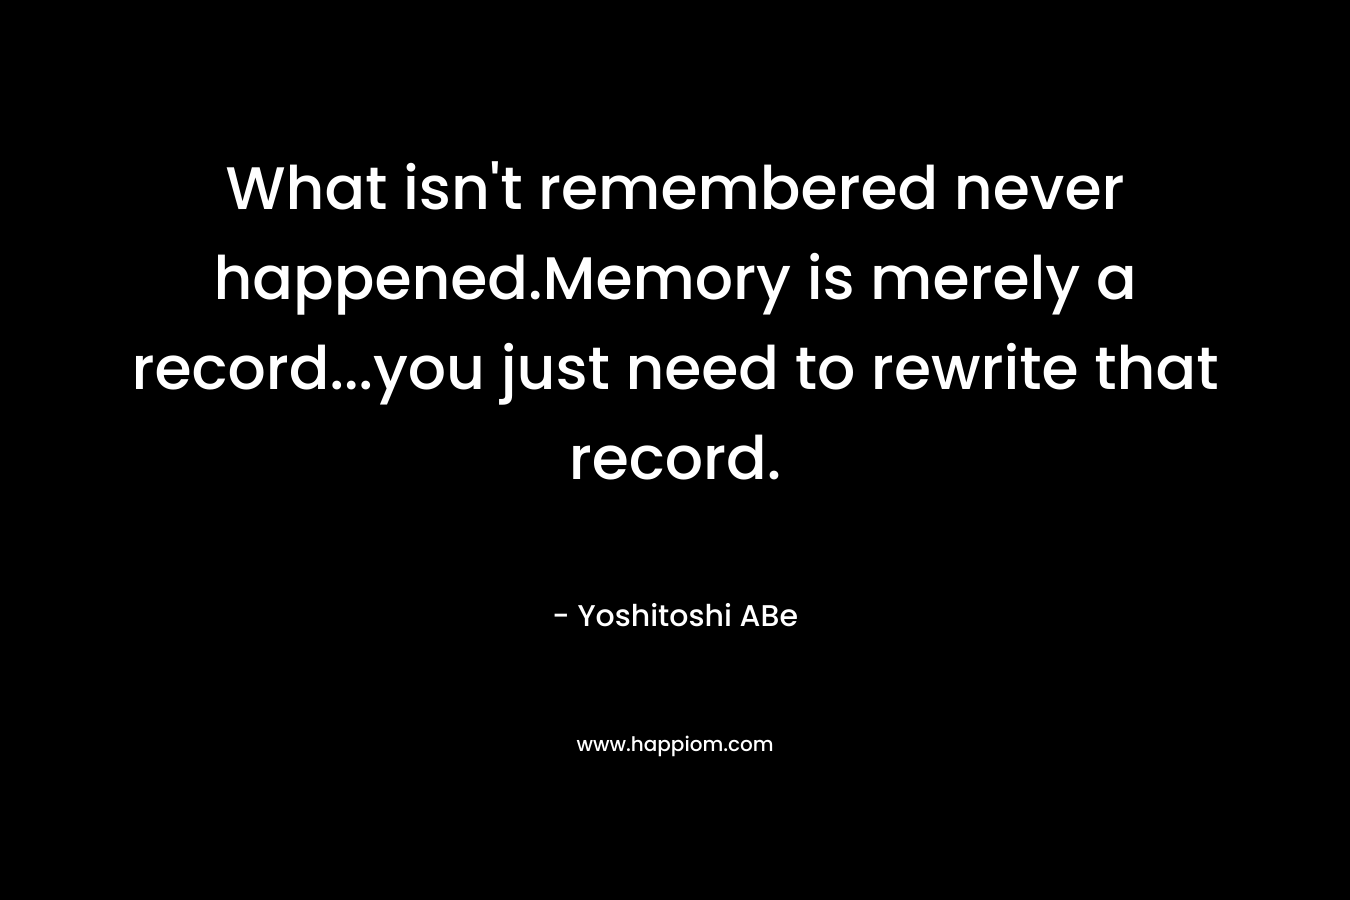 What isn't remembered never happened.Memory is merely a record...you just need to rewrite that record.